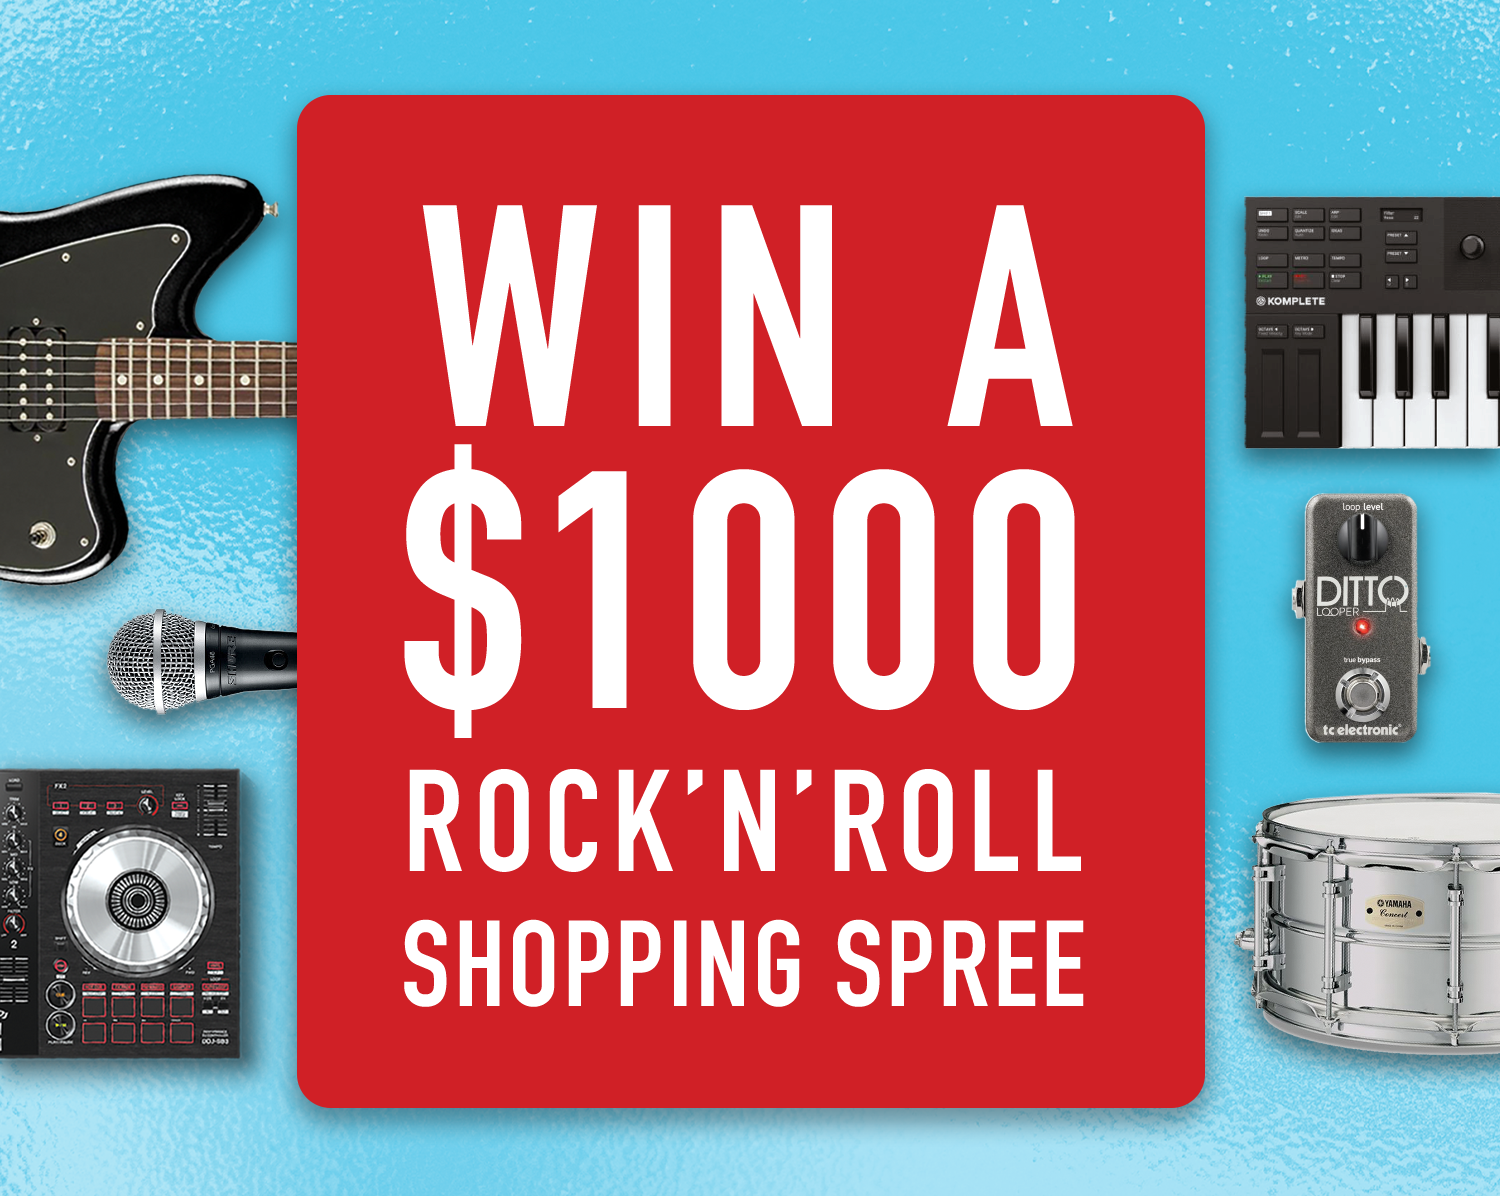 Win $1000 Shopping Spree for this Holiday Season!